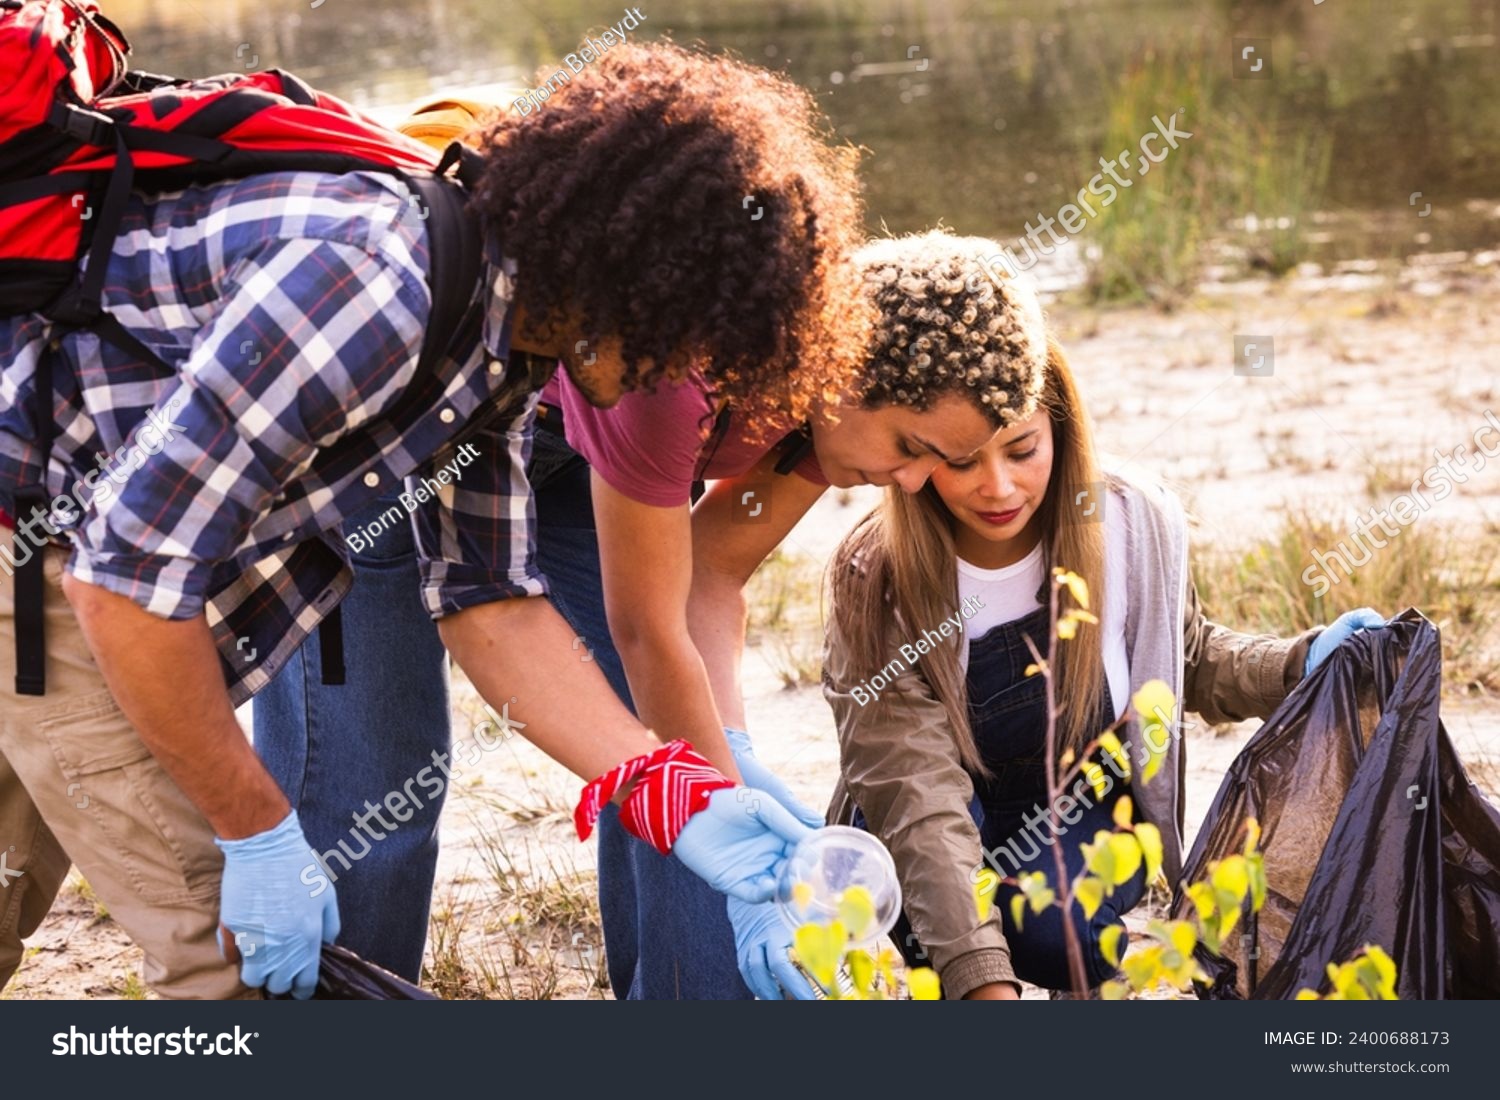 This image captures a moment of environmental stewardship, as a diverse group of volunteers engage in a community clean-up effort by a lake. The photograph features a Middle-Eastern man and a woman of #2400688173